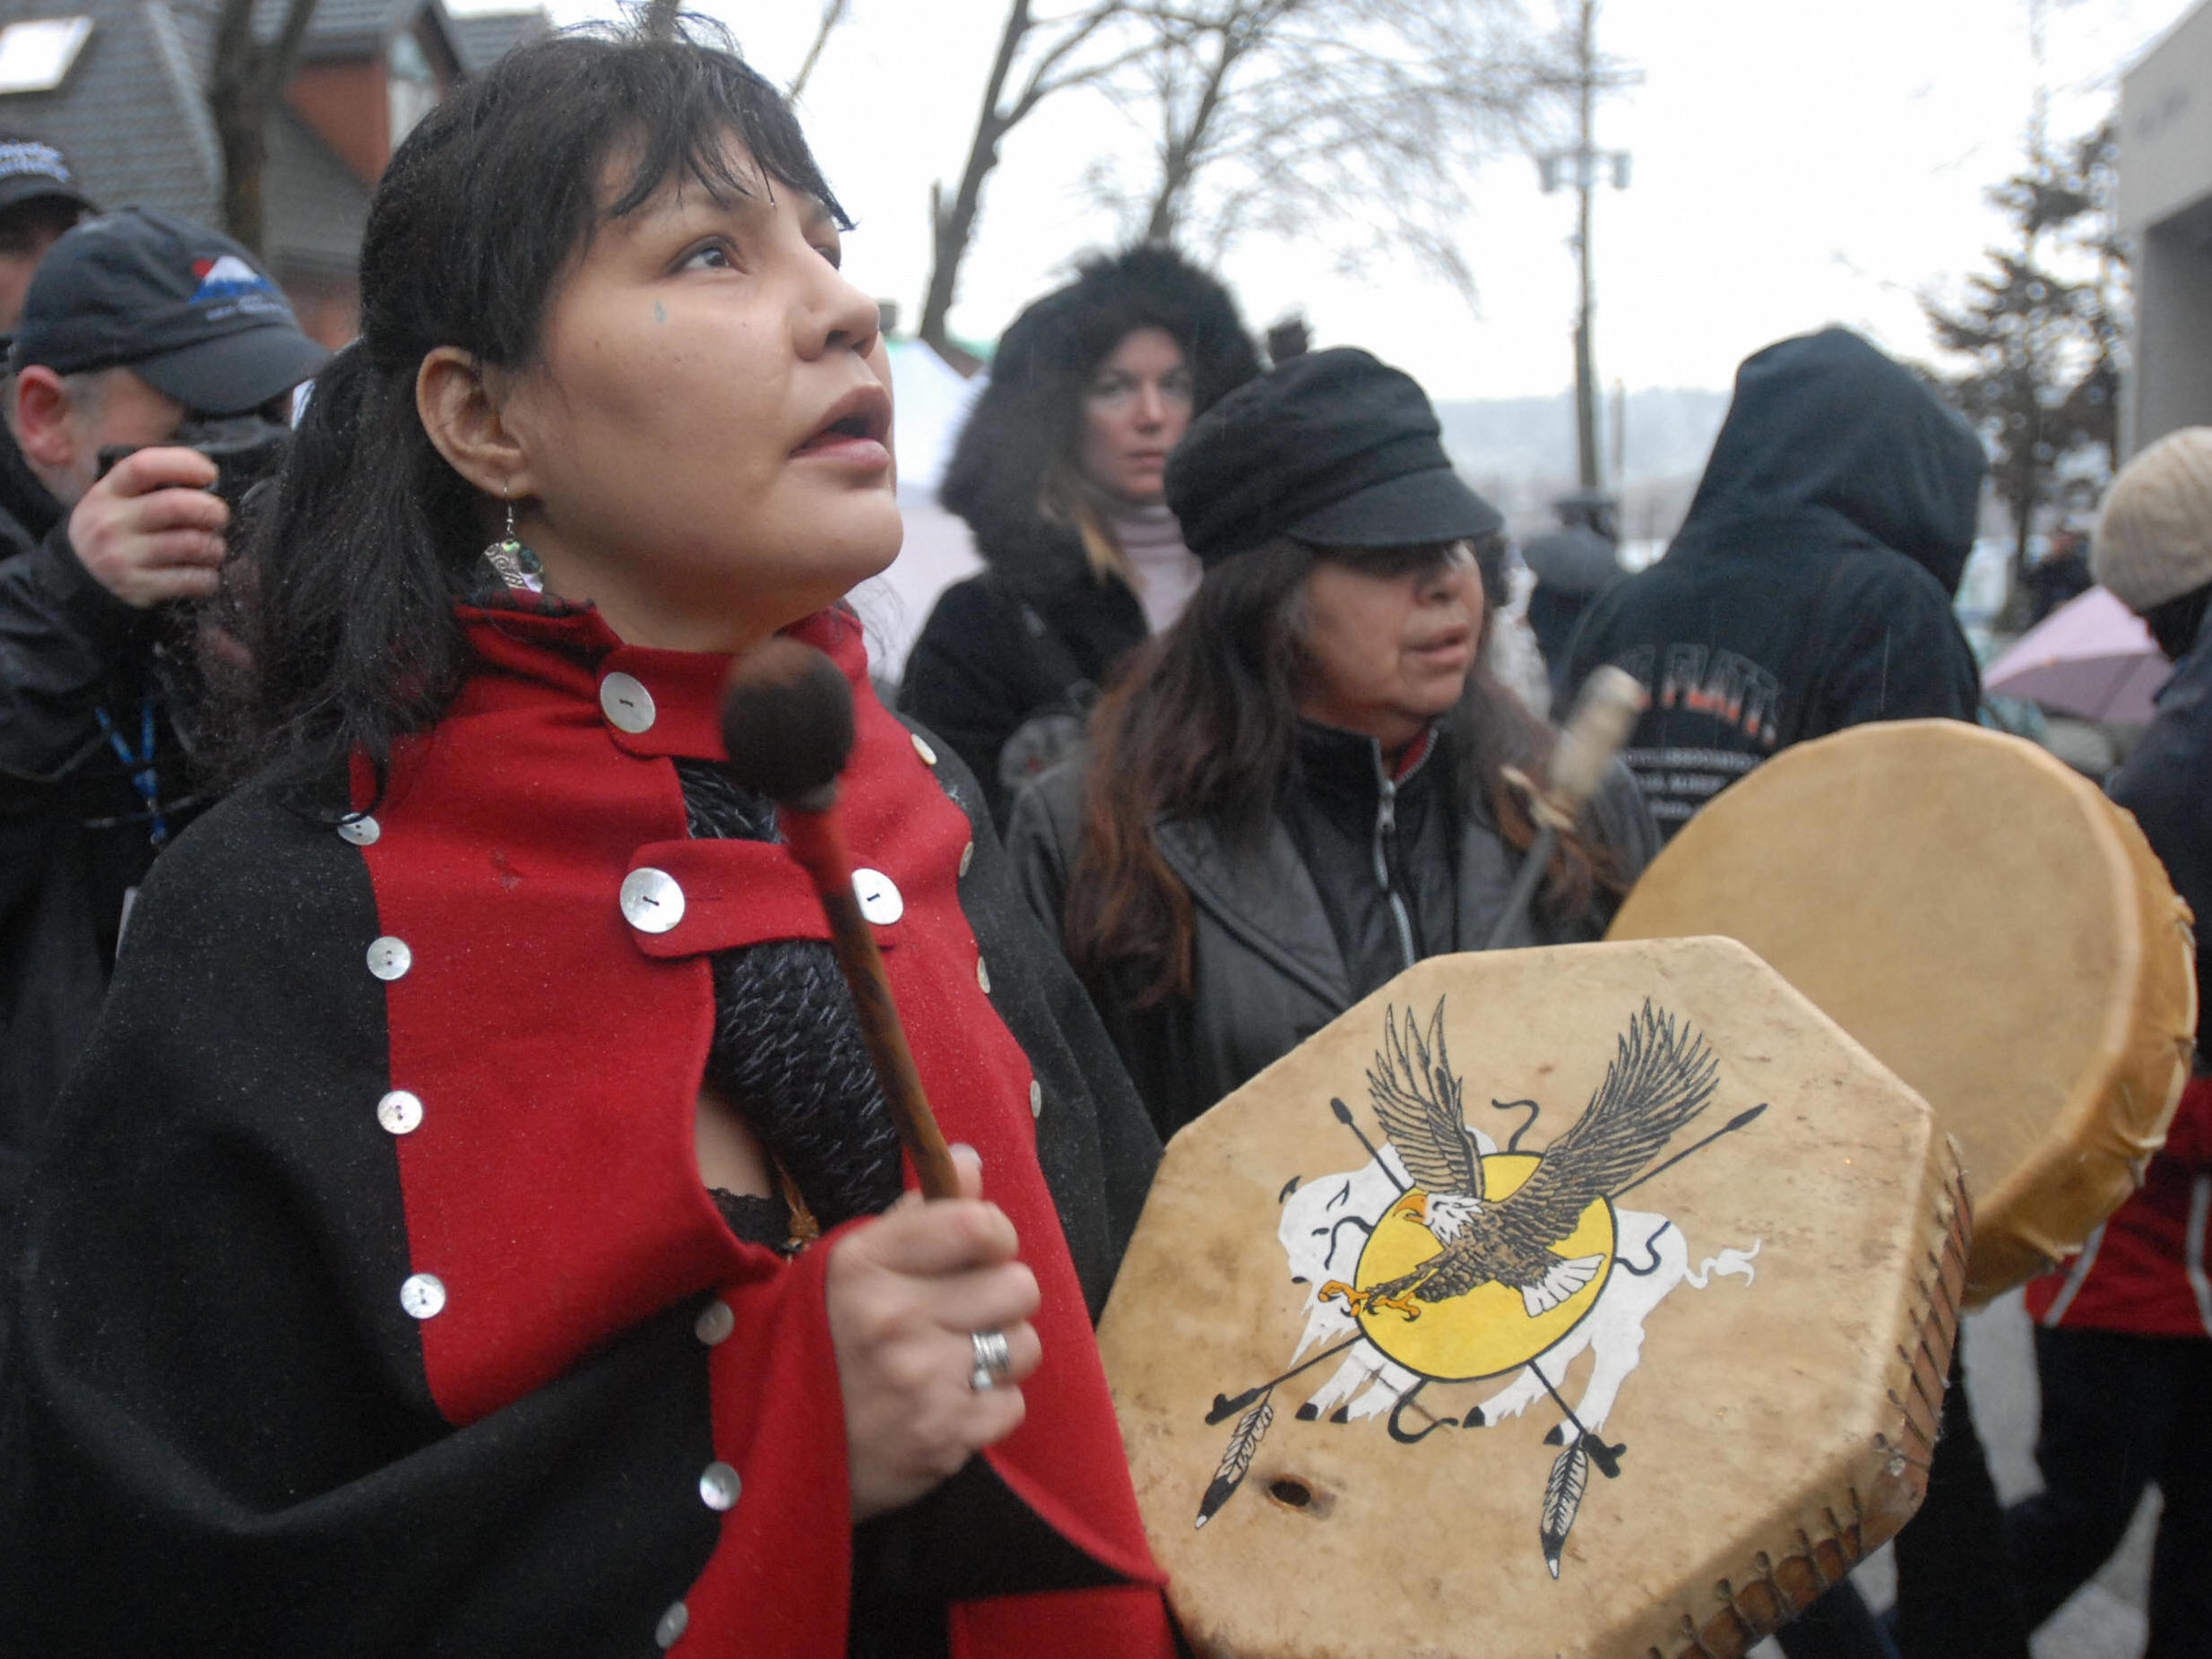 Women demonstrate at the trial in 2007 of Canadian Robert Pickton, who told police he killed 49 women and was jailed for life